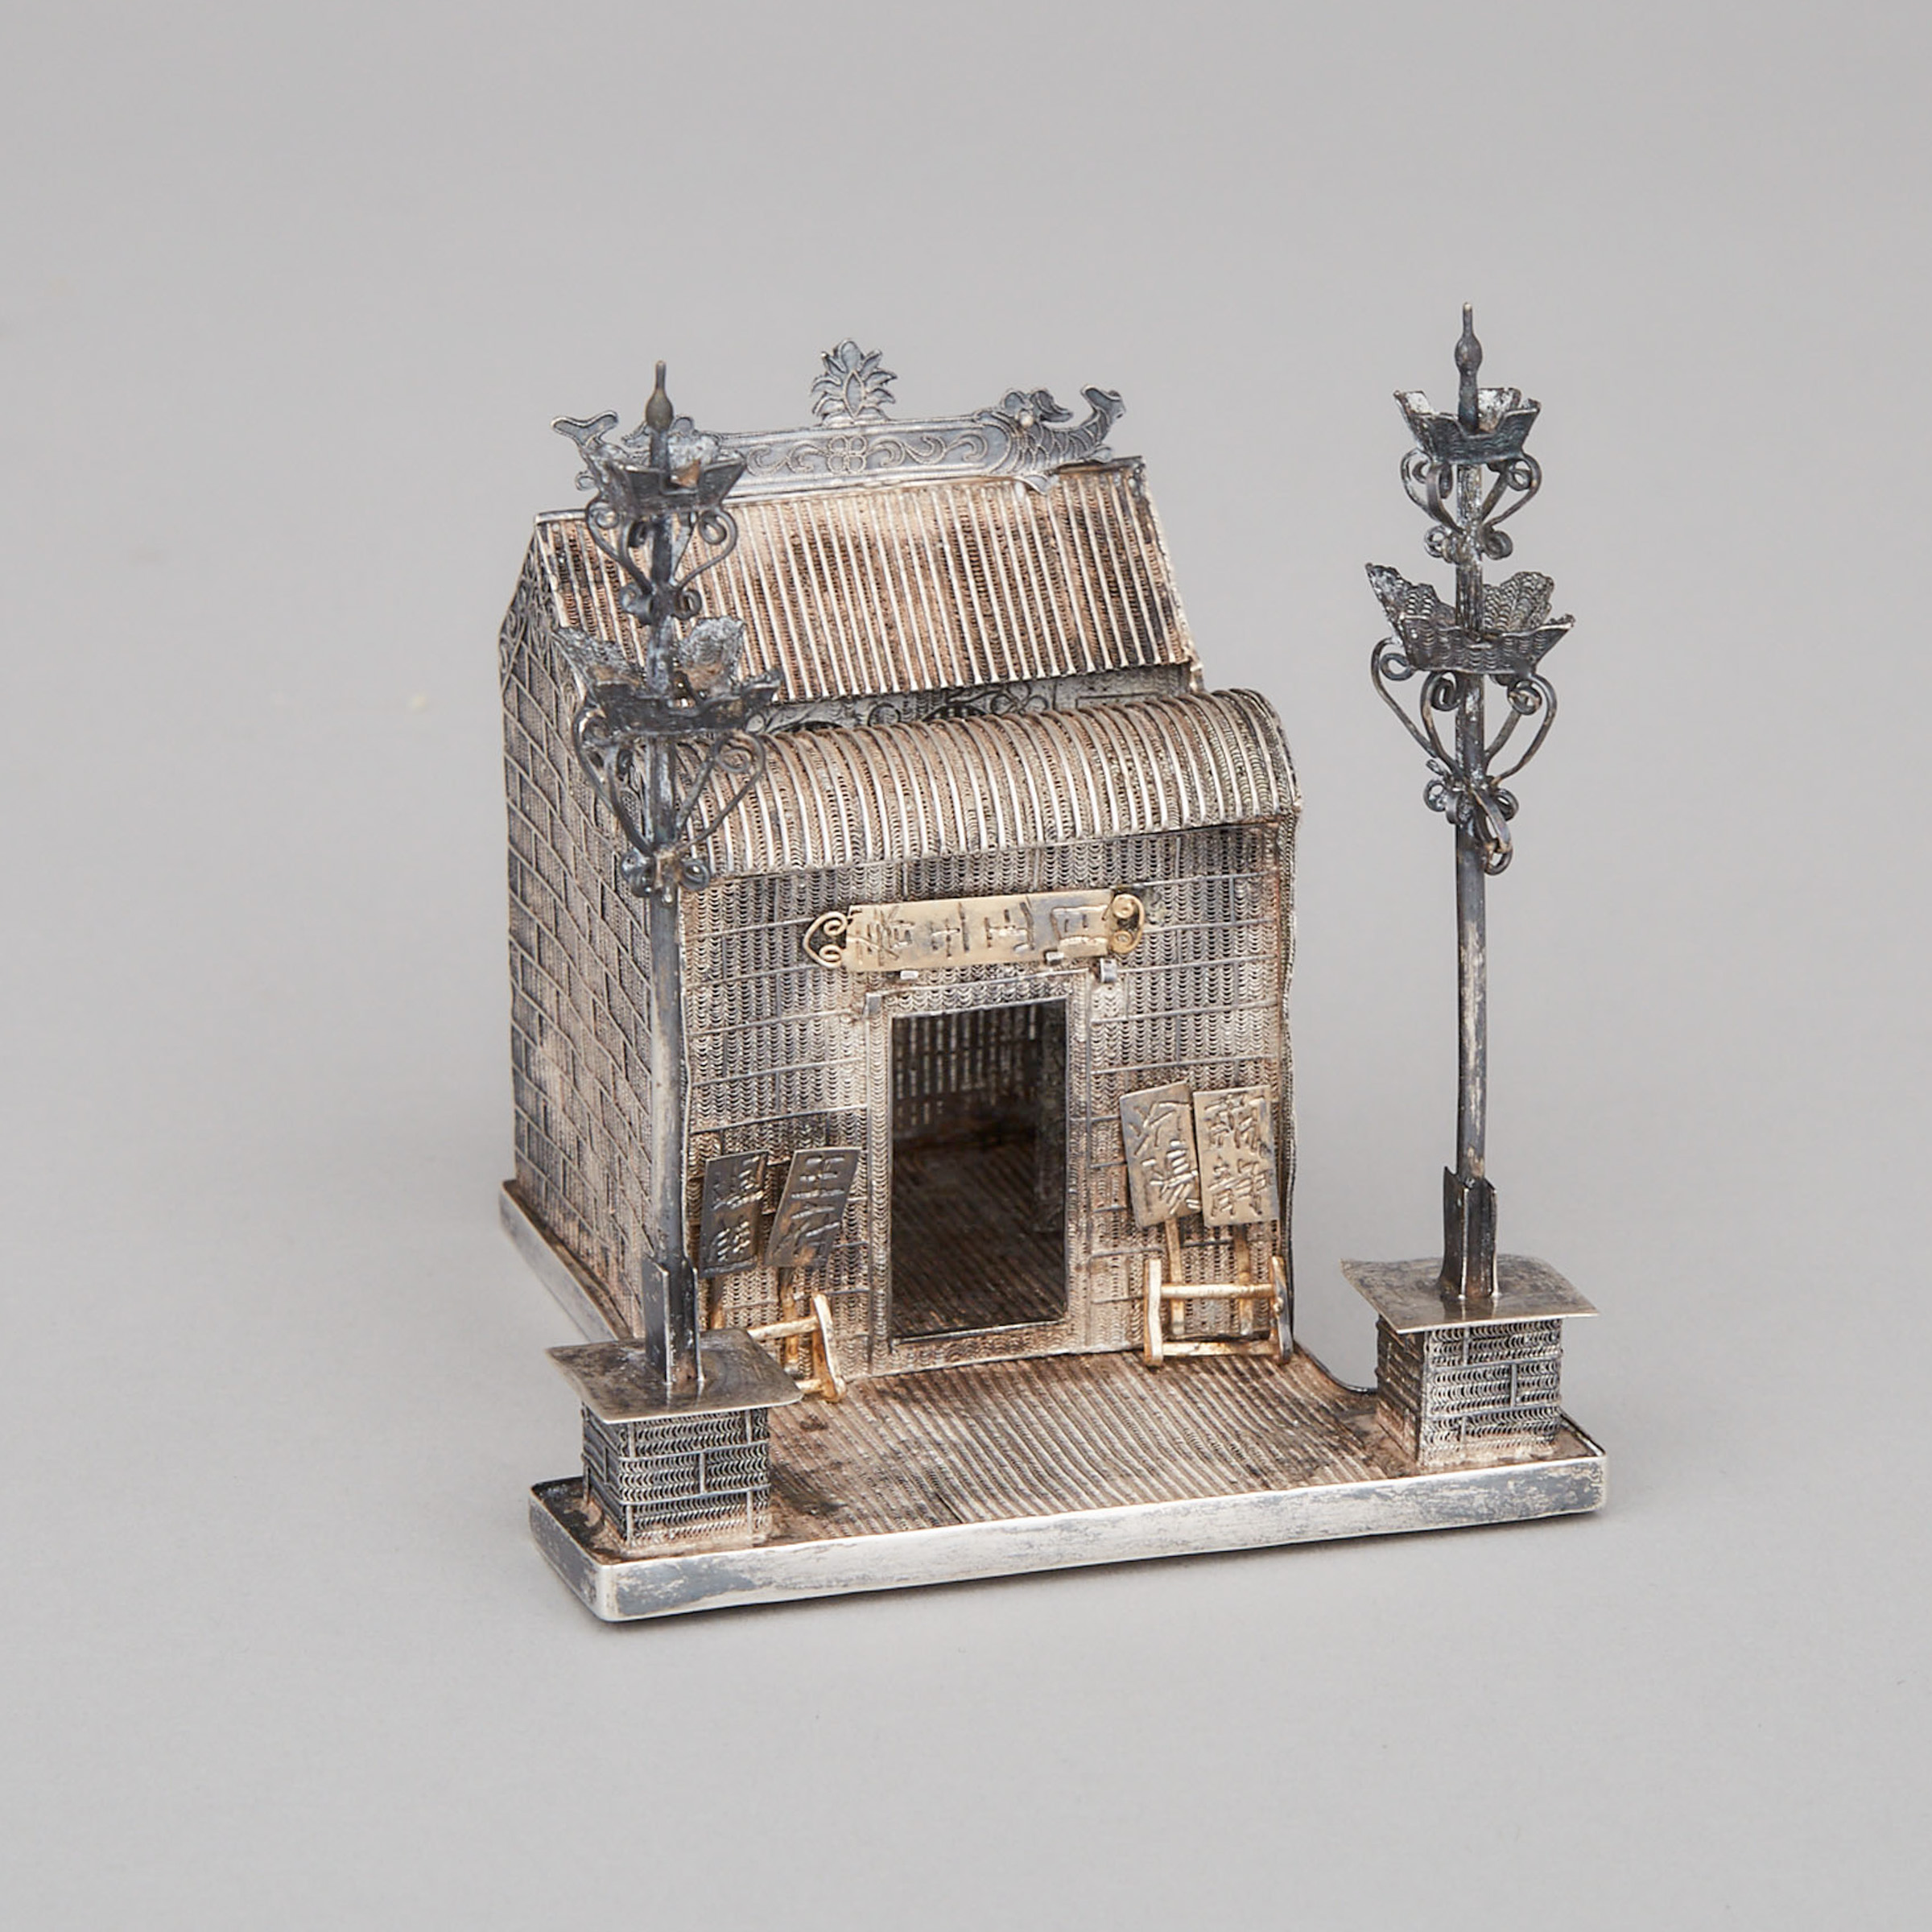 Chinese Silver Miniature Model of a Temple, early 20th century